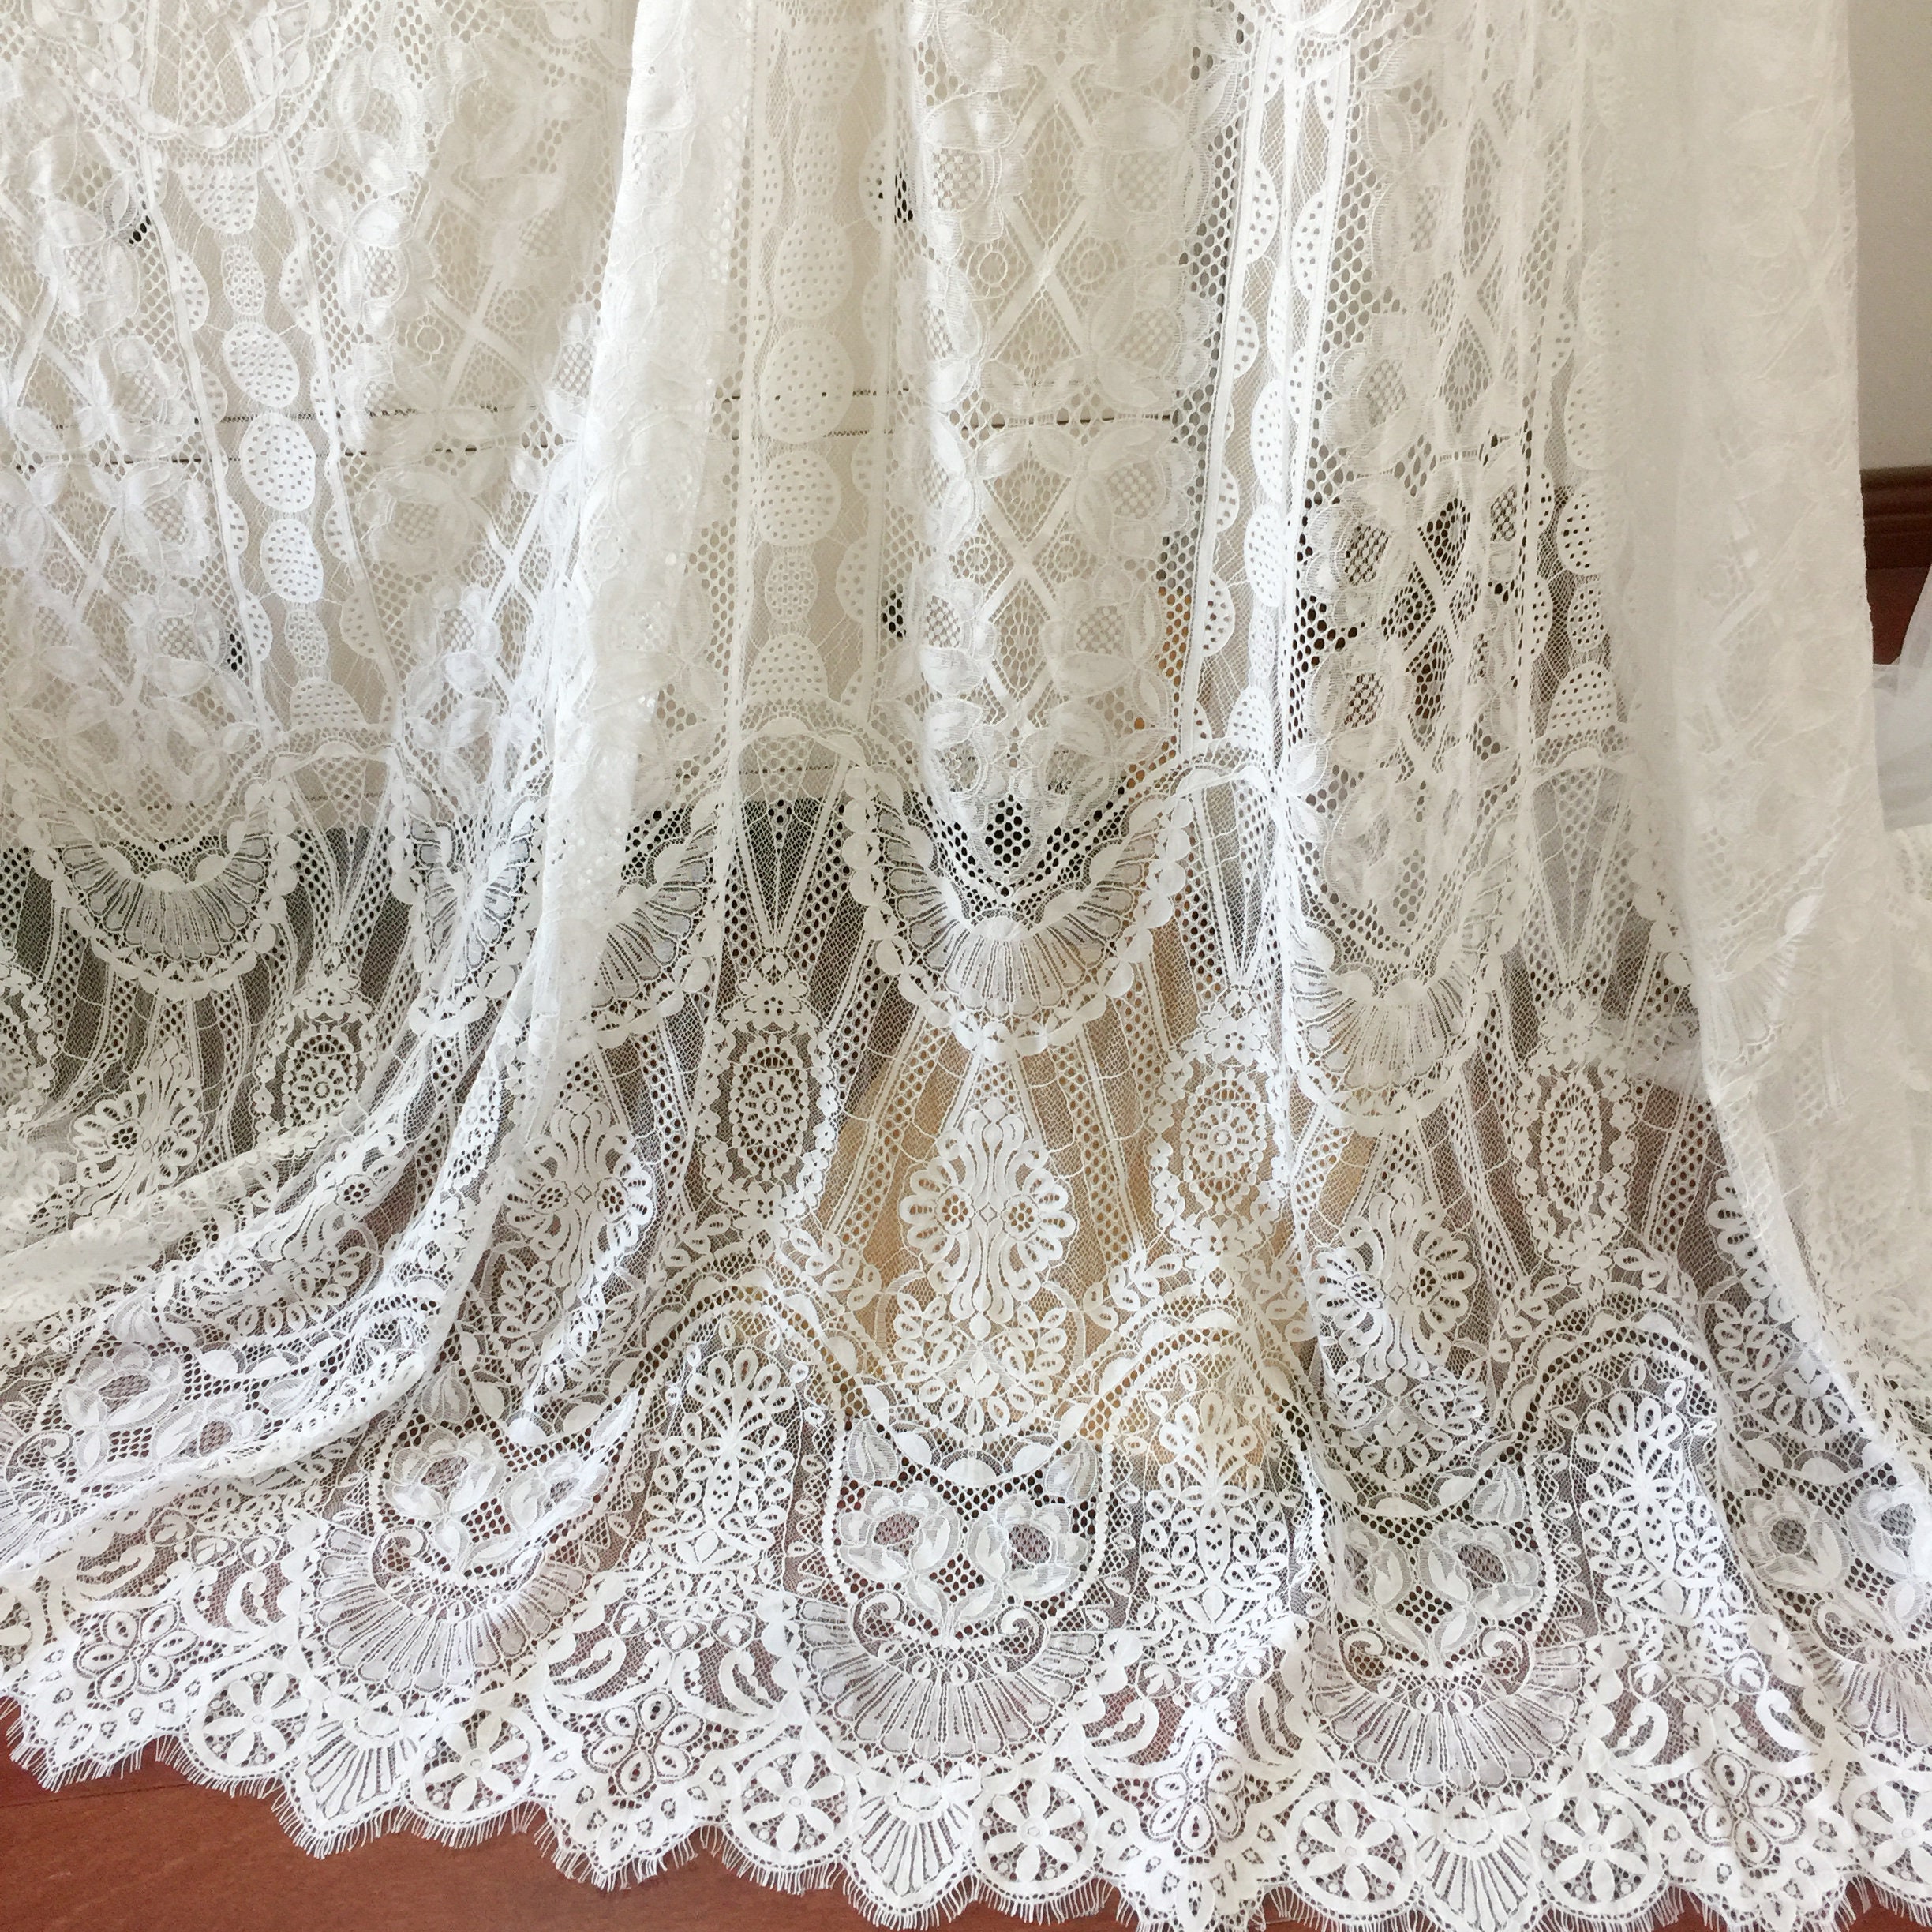 3 Meters Vinatges Style French Chantilly Bridal Gown Lace | Etsy